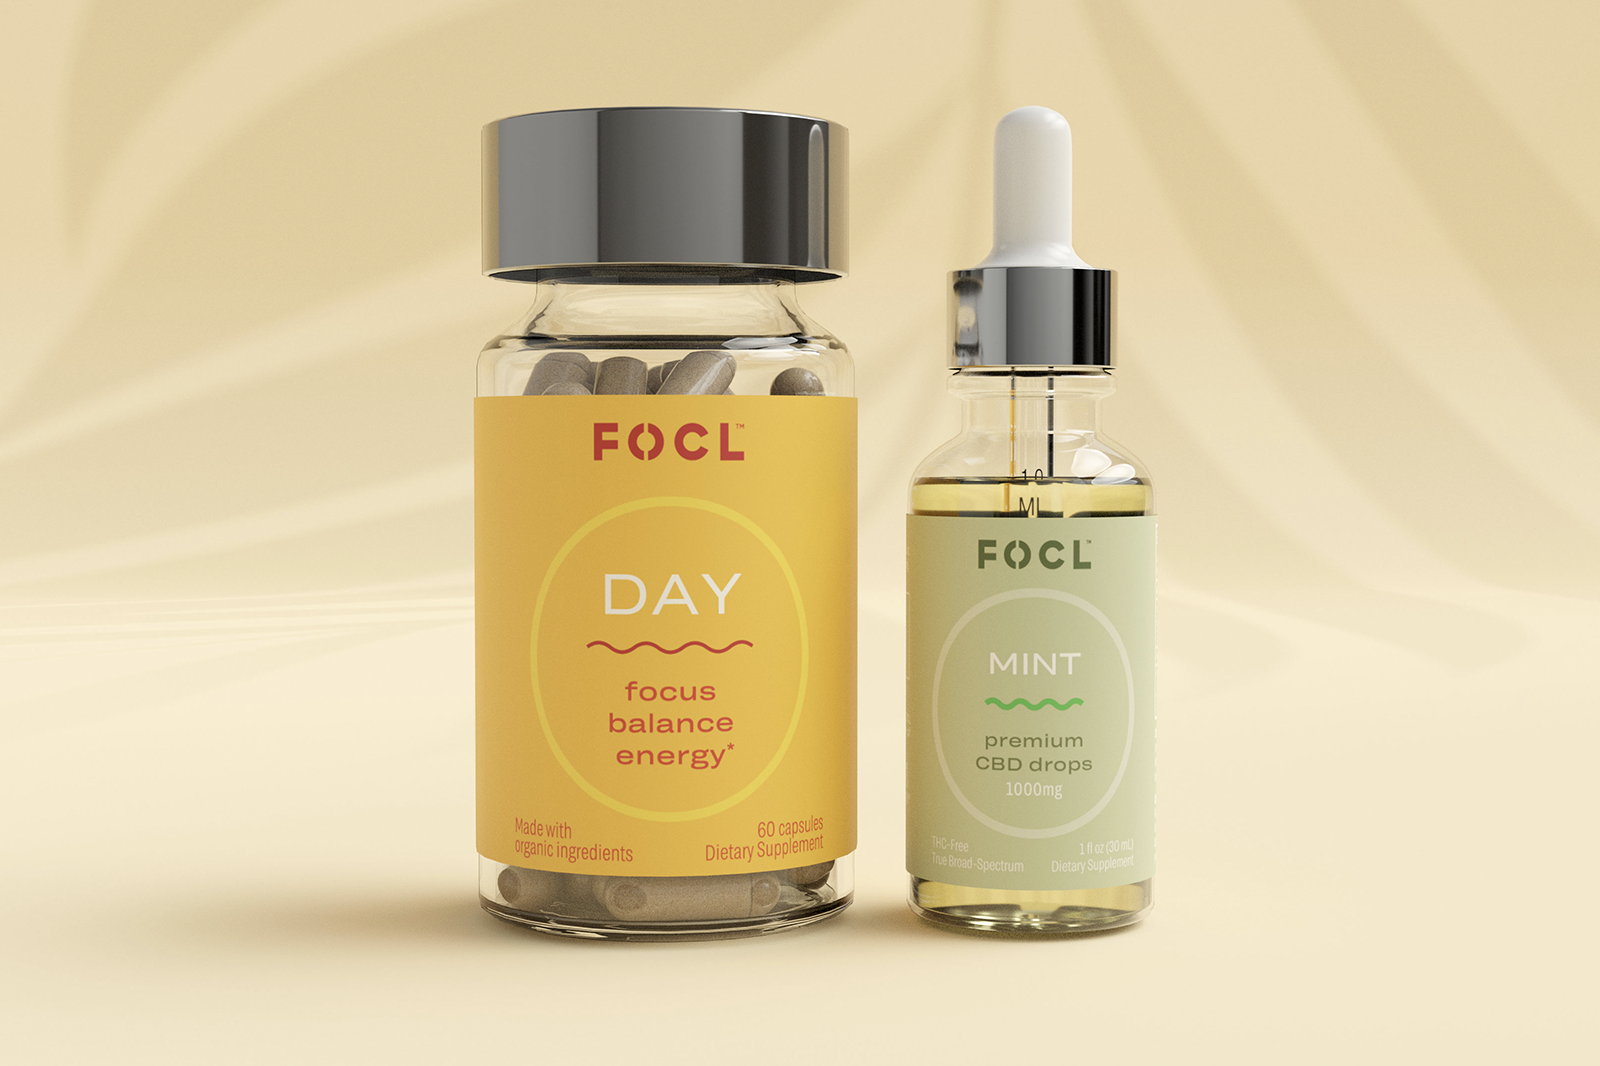 FOCL Day capsules next to FOCL Mint CBD Drops.